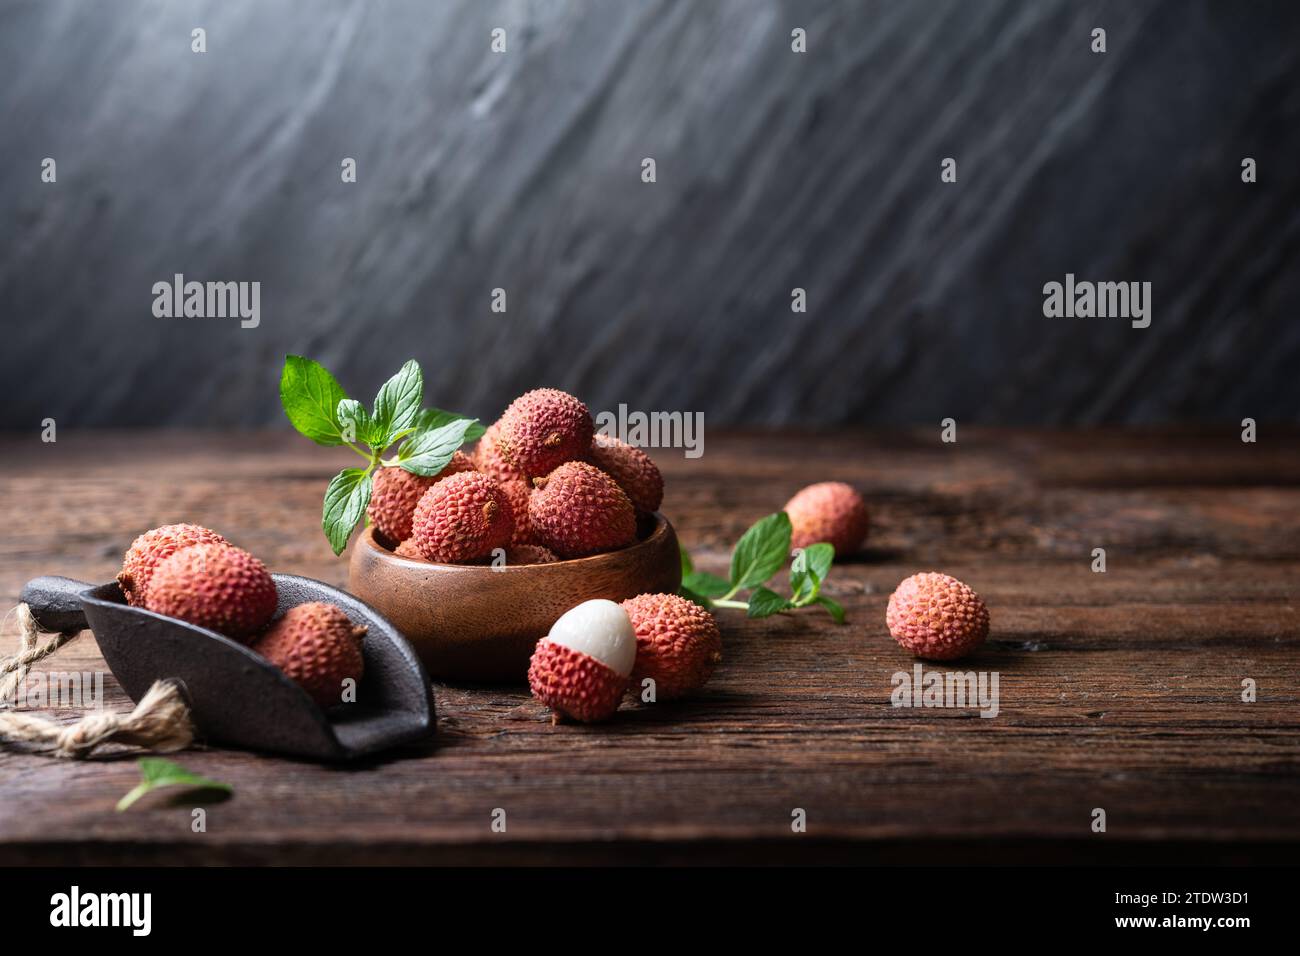 Bowl of ripe tropical lichee fruit (Litchi chinensis) on wooden background Stock Photo